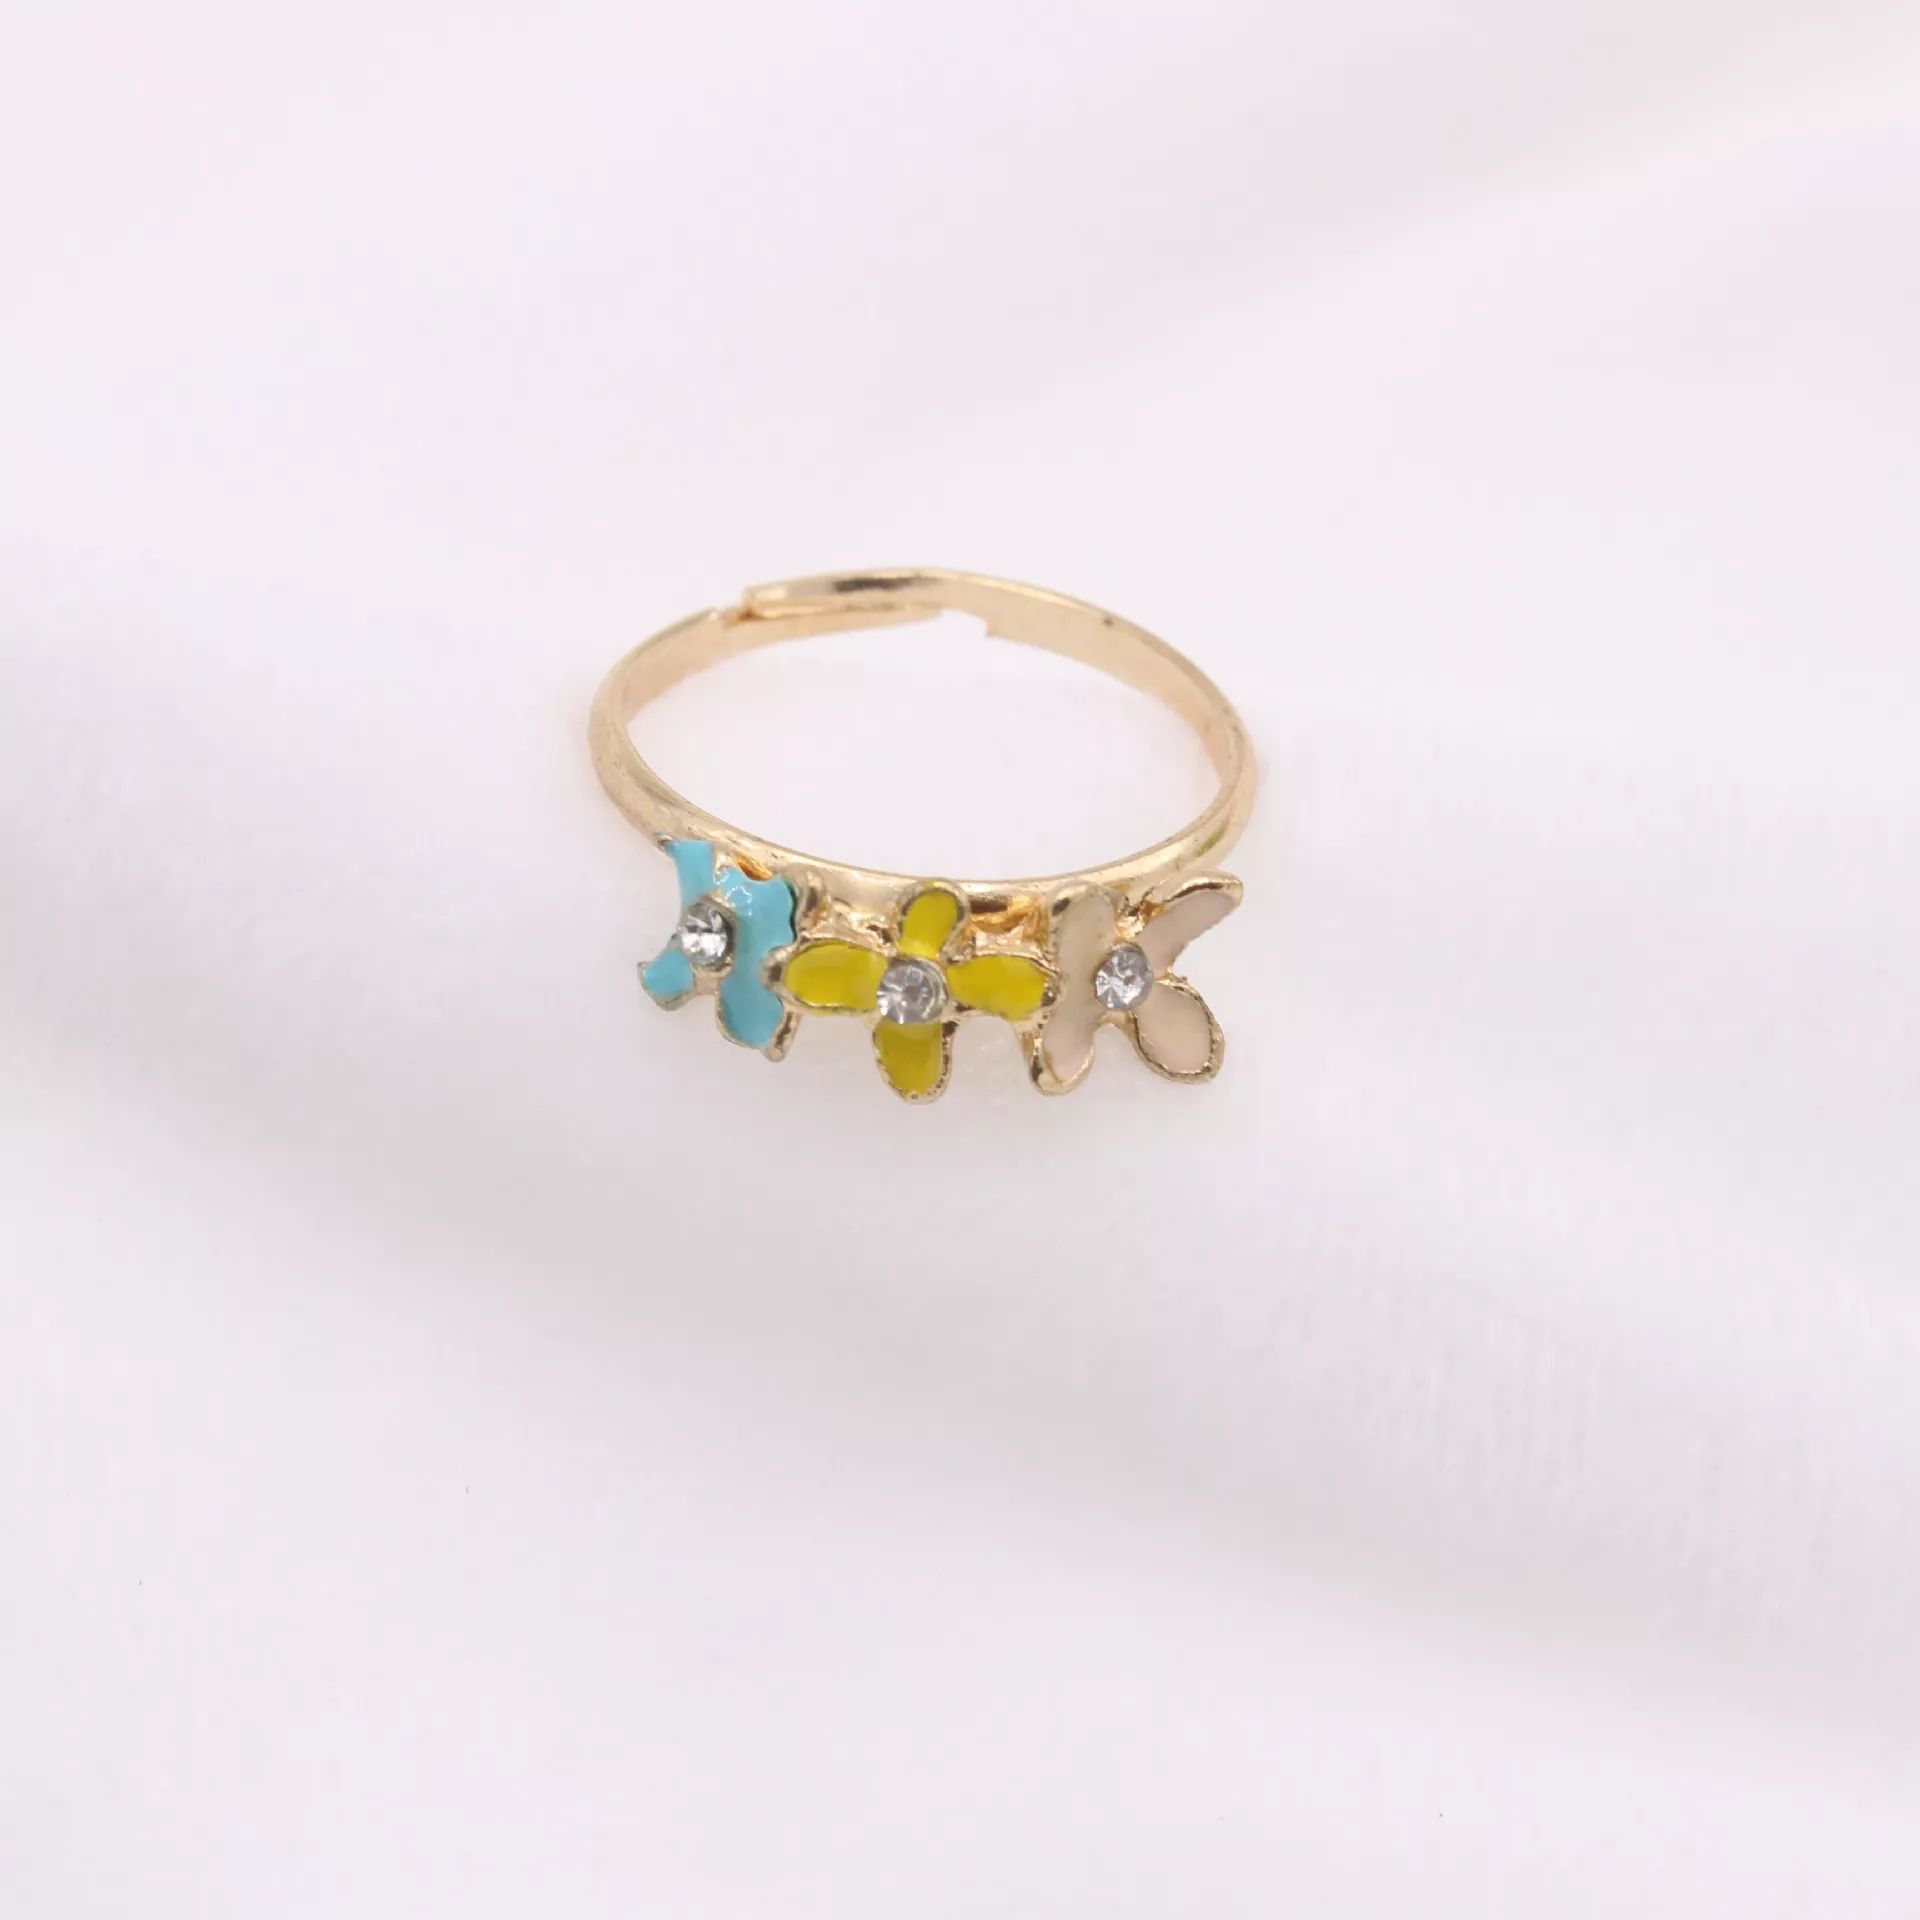 Accessories Small Refreshing Daisy Flower Rings Fashion Diamonds Dripping  Oil Yiwu Accessories Intended For Latest Daisy Flower Rings (View 16 of 25)